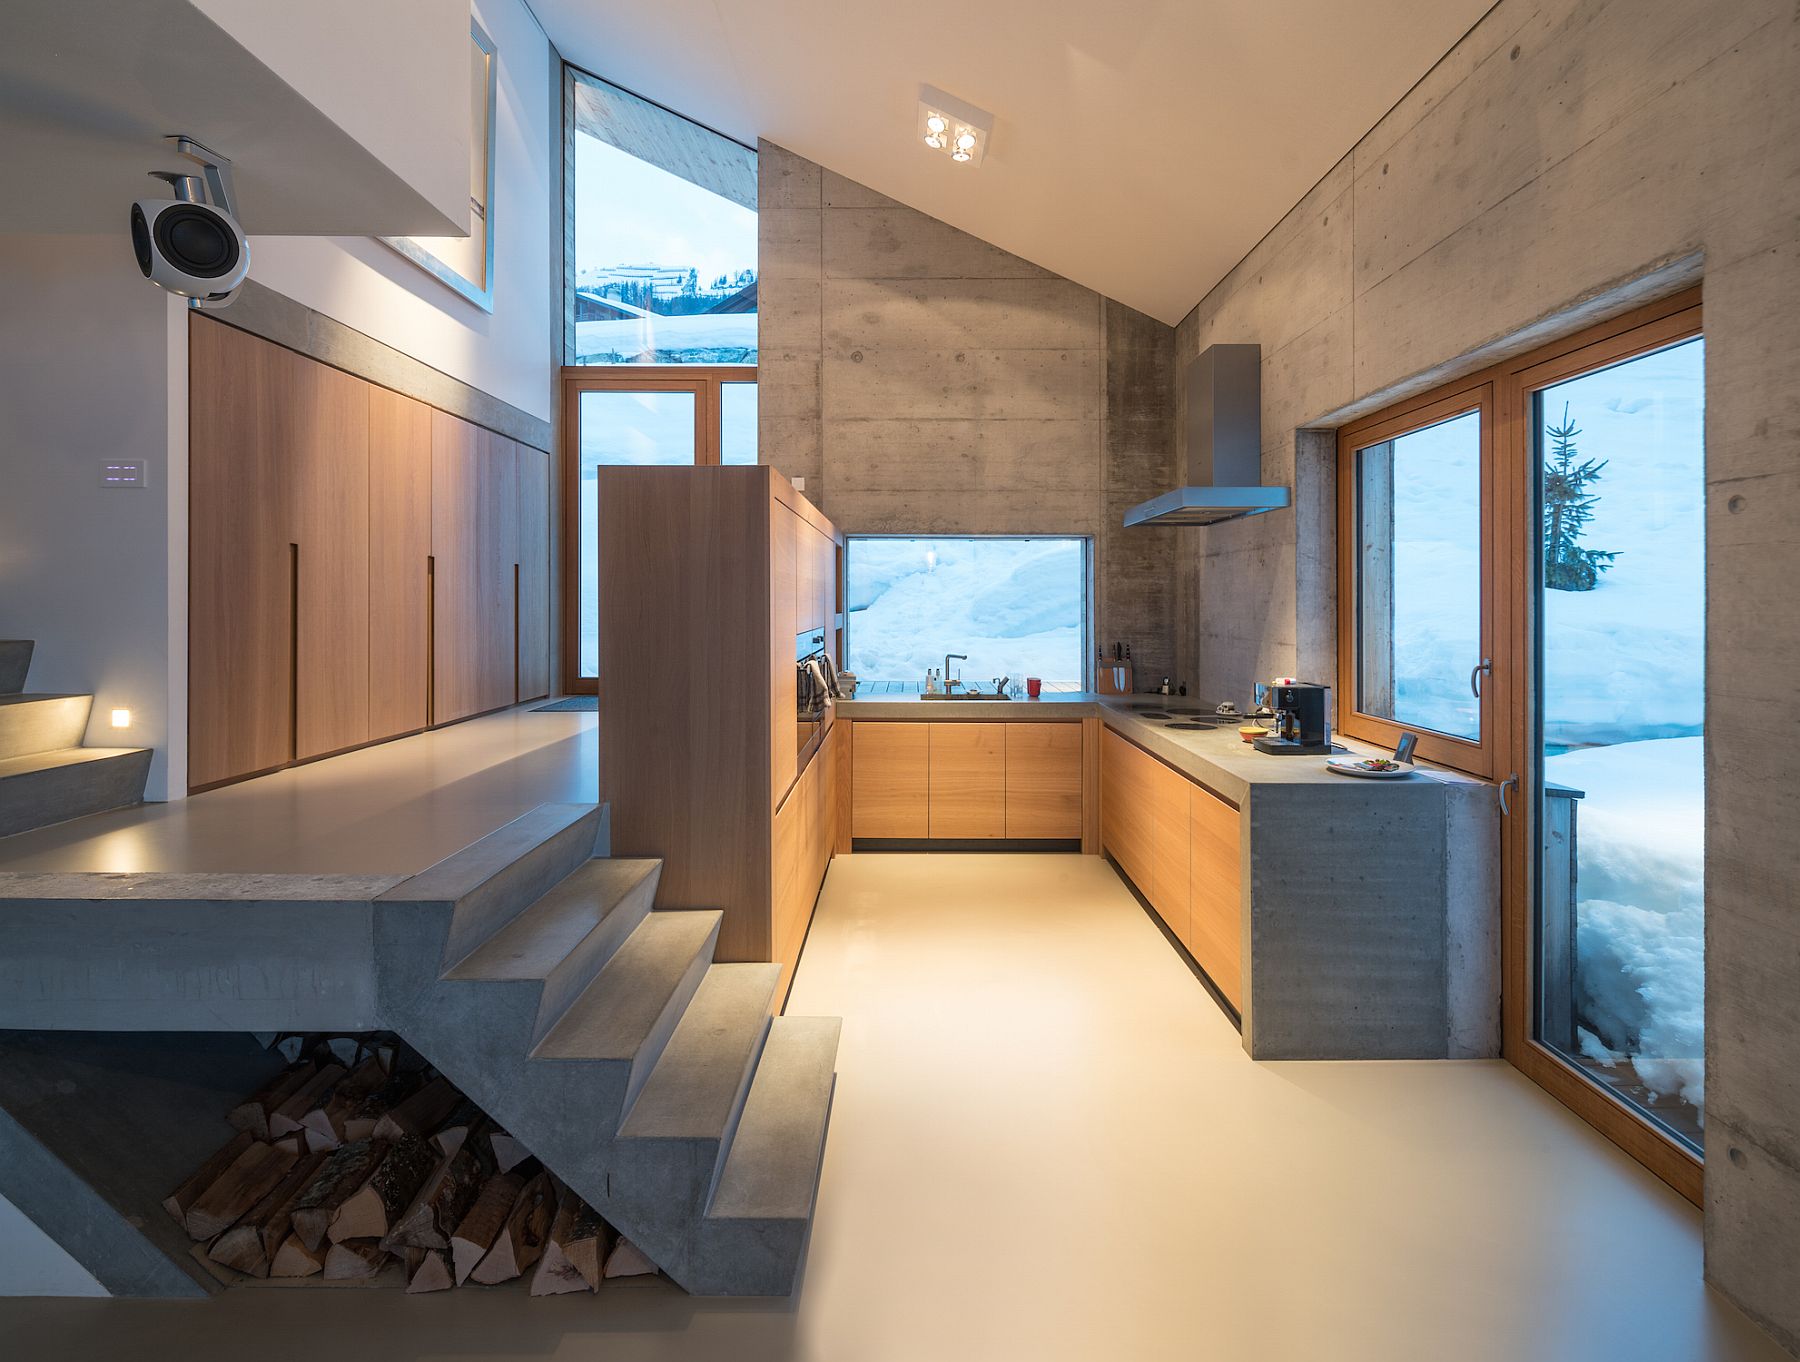 Exposed concrete and wood shape the interior of the contemporary Swiss chalet